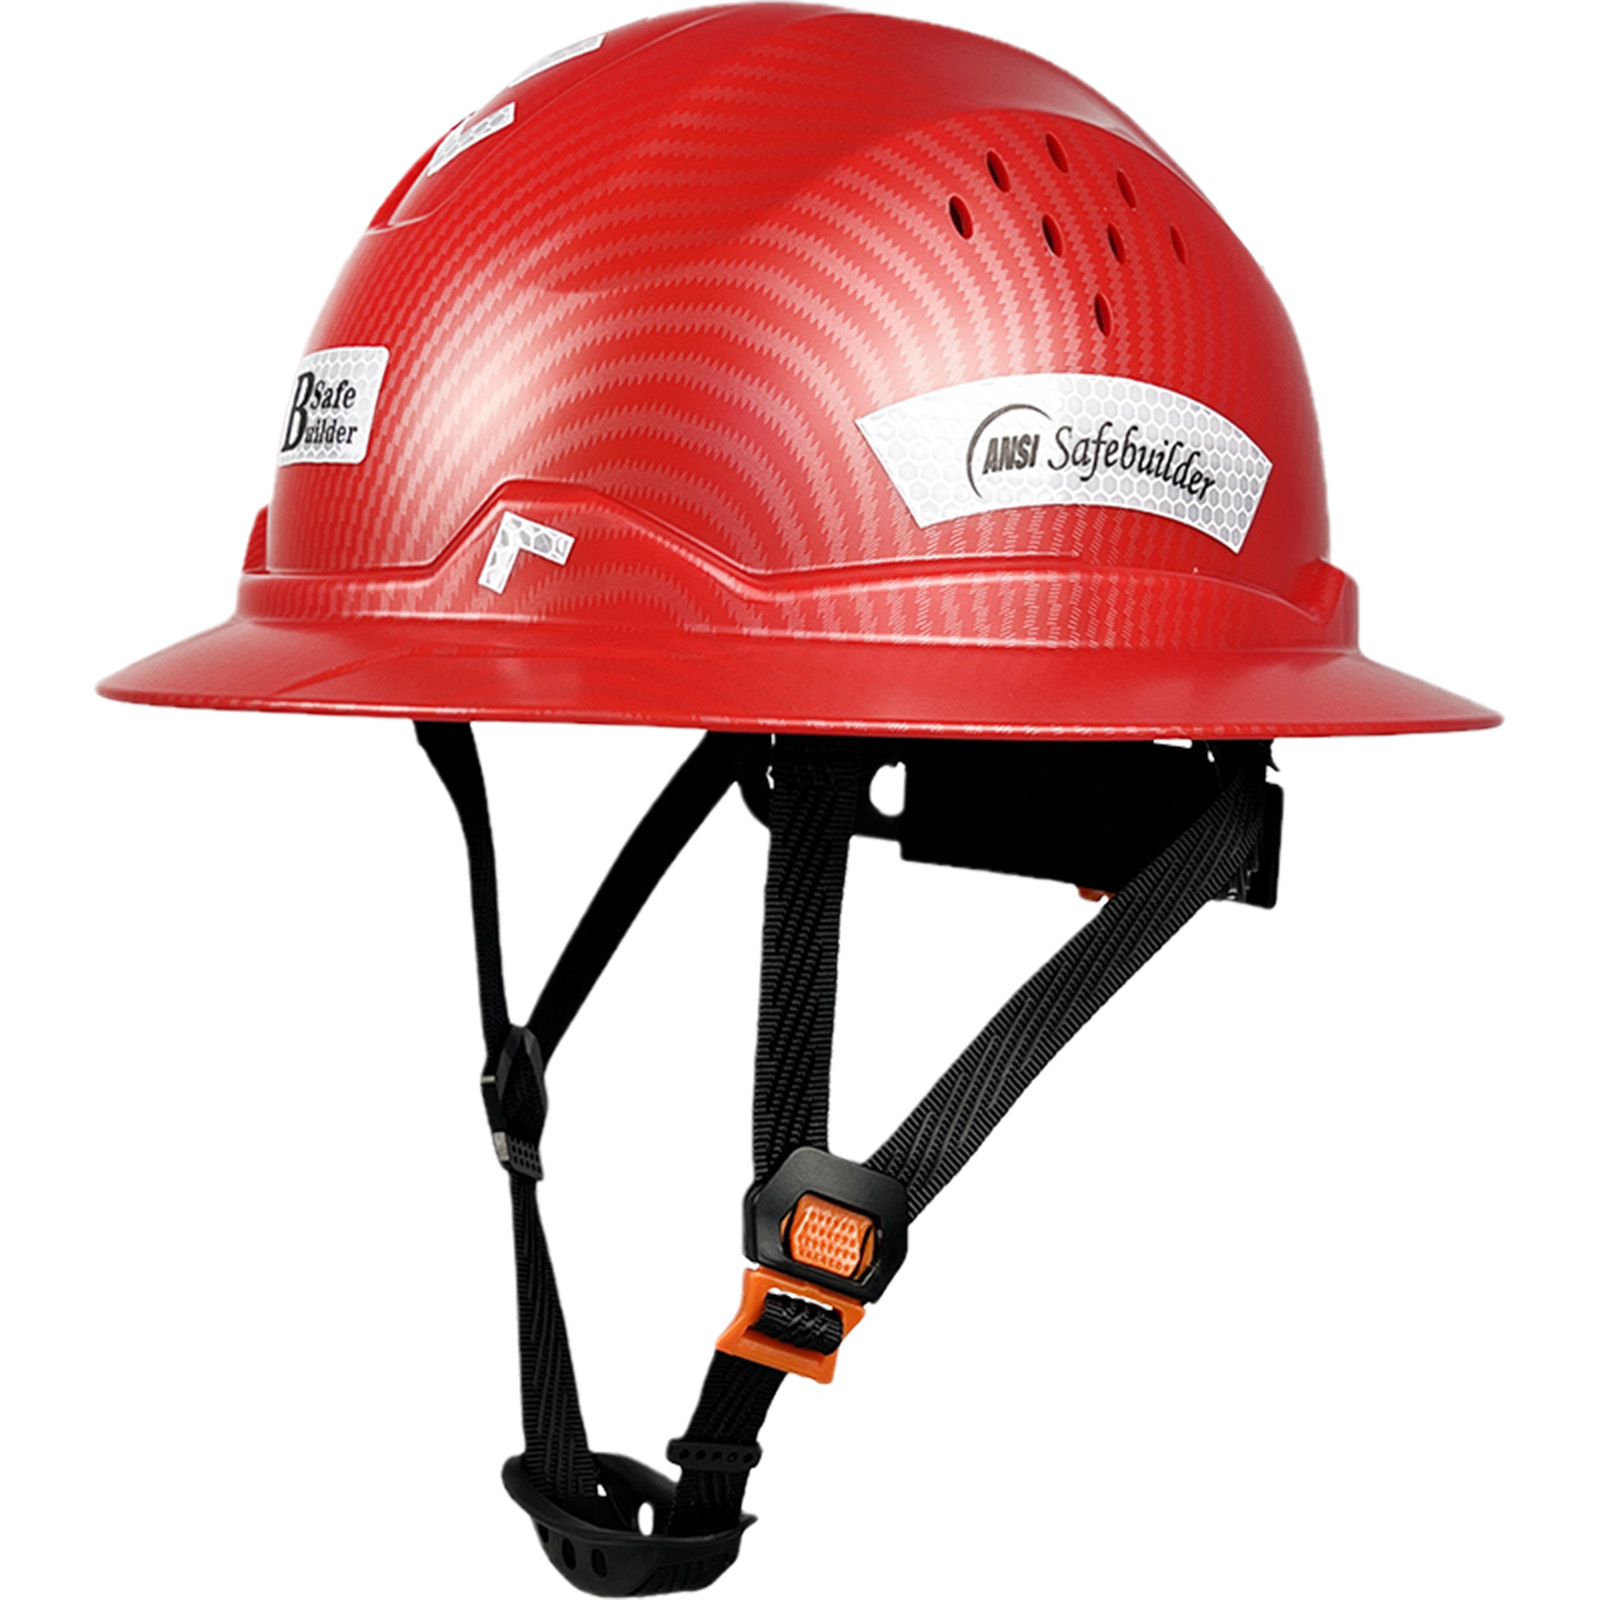 Ansi Full Brim Hard Hat For Engineer Construction Work Cap For Men ANSI  Approved HDPE Safety Helmet with 6 Point Adjustable